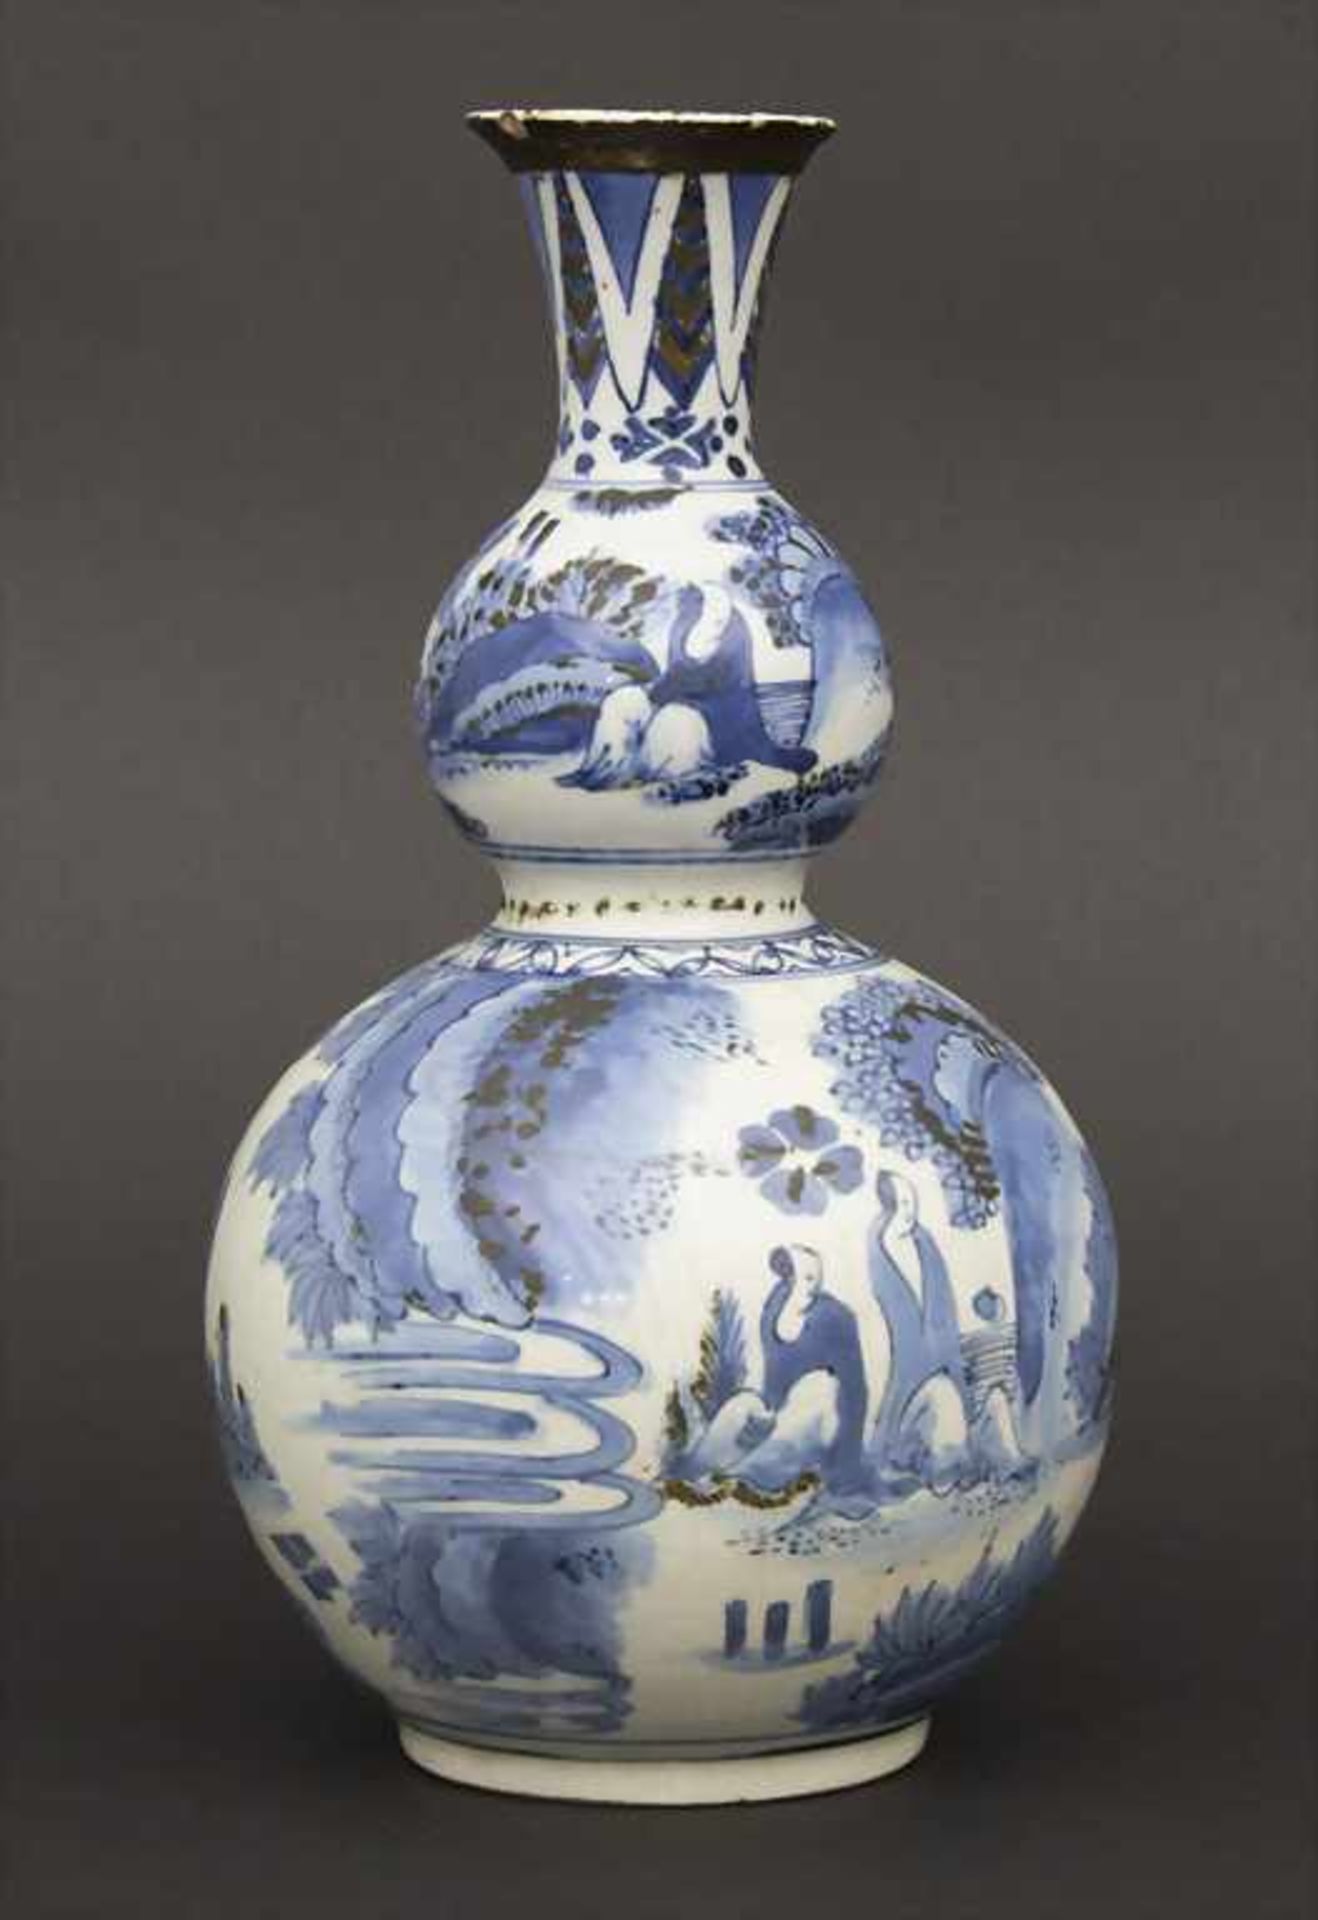 Ziervase / A vase, China, Ming/Qing- Dynastie - Image 2 of 7